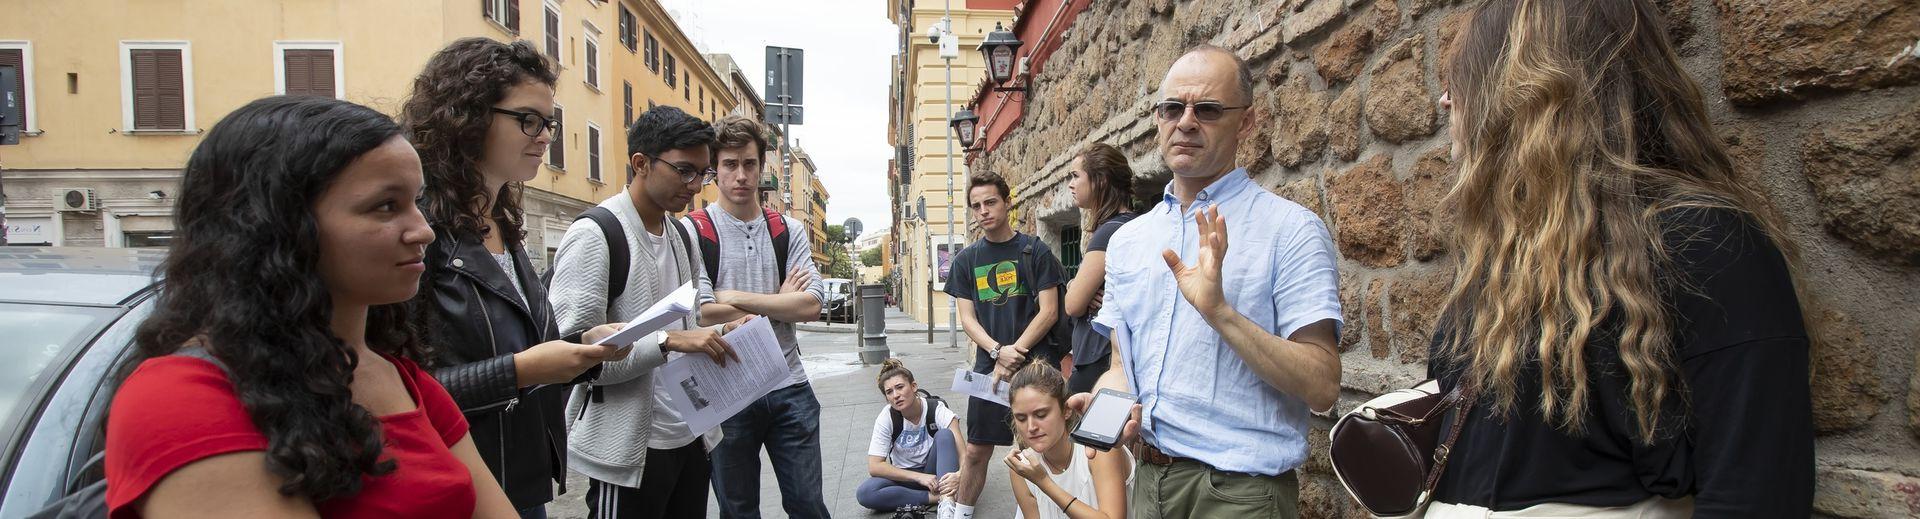 A Temple professor addresses students during a study away program in Rome.